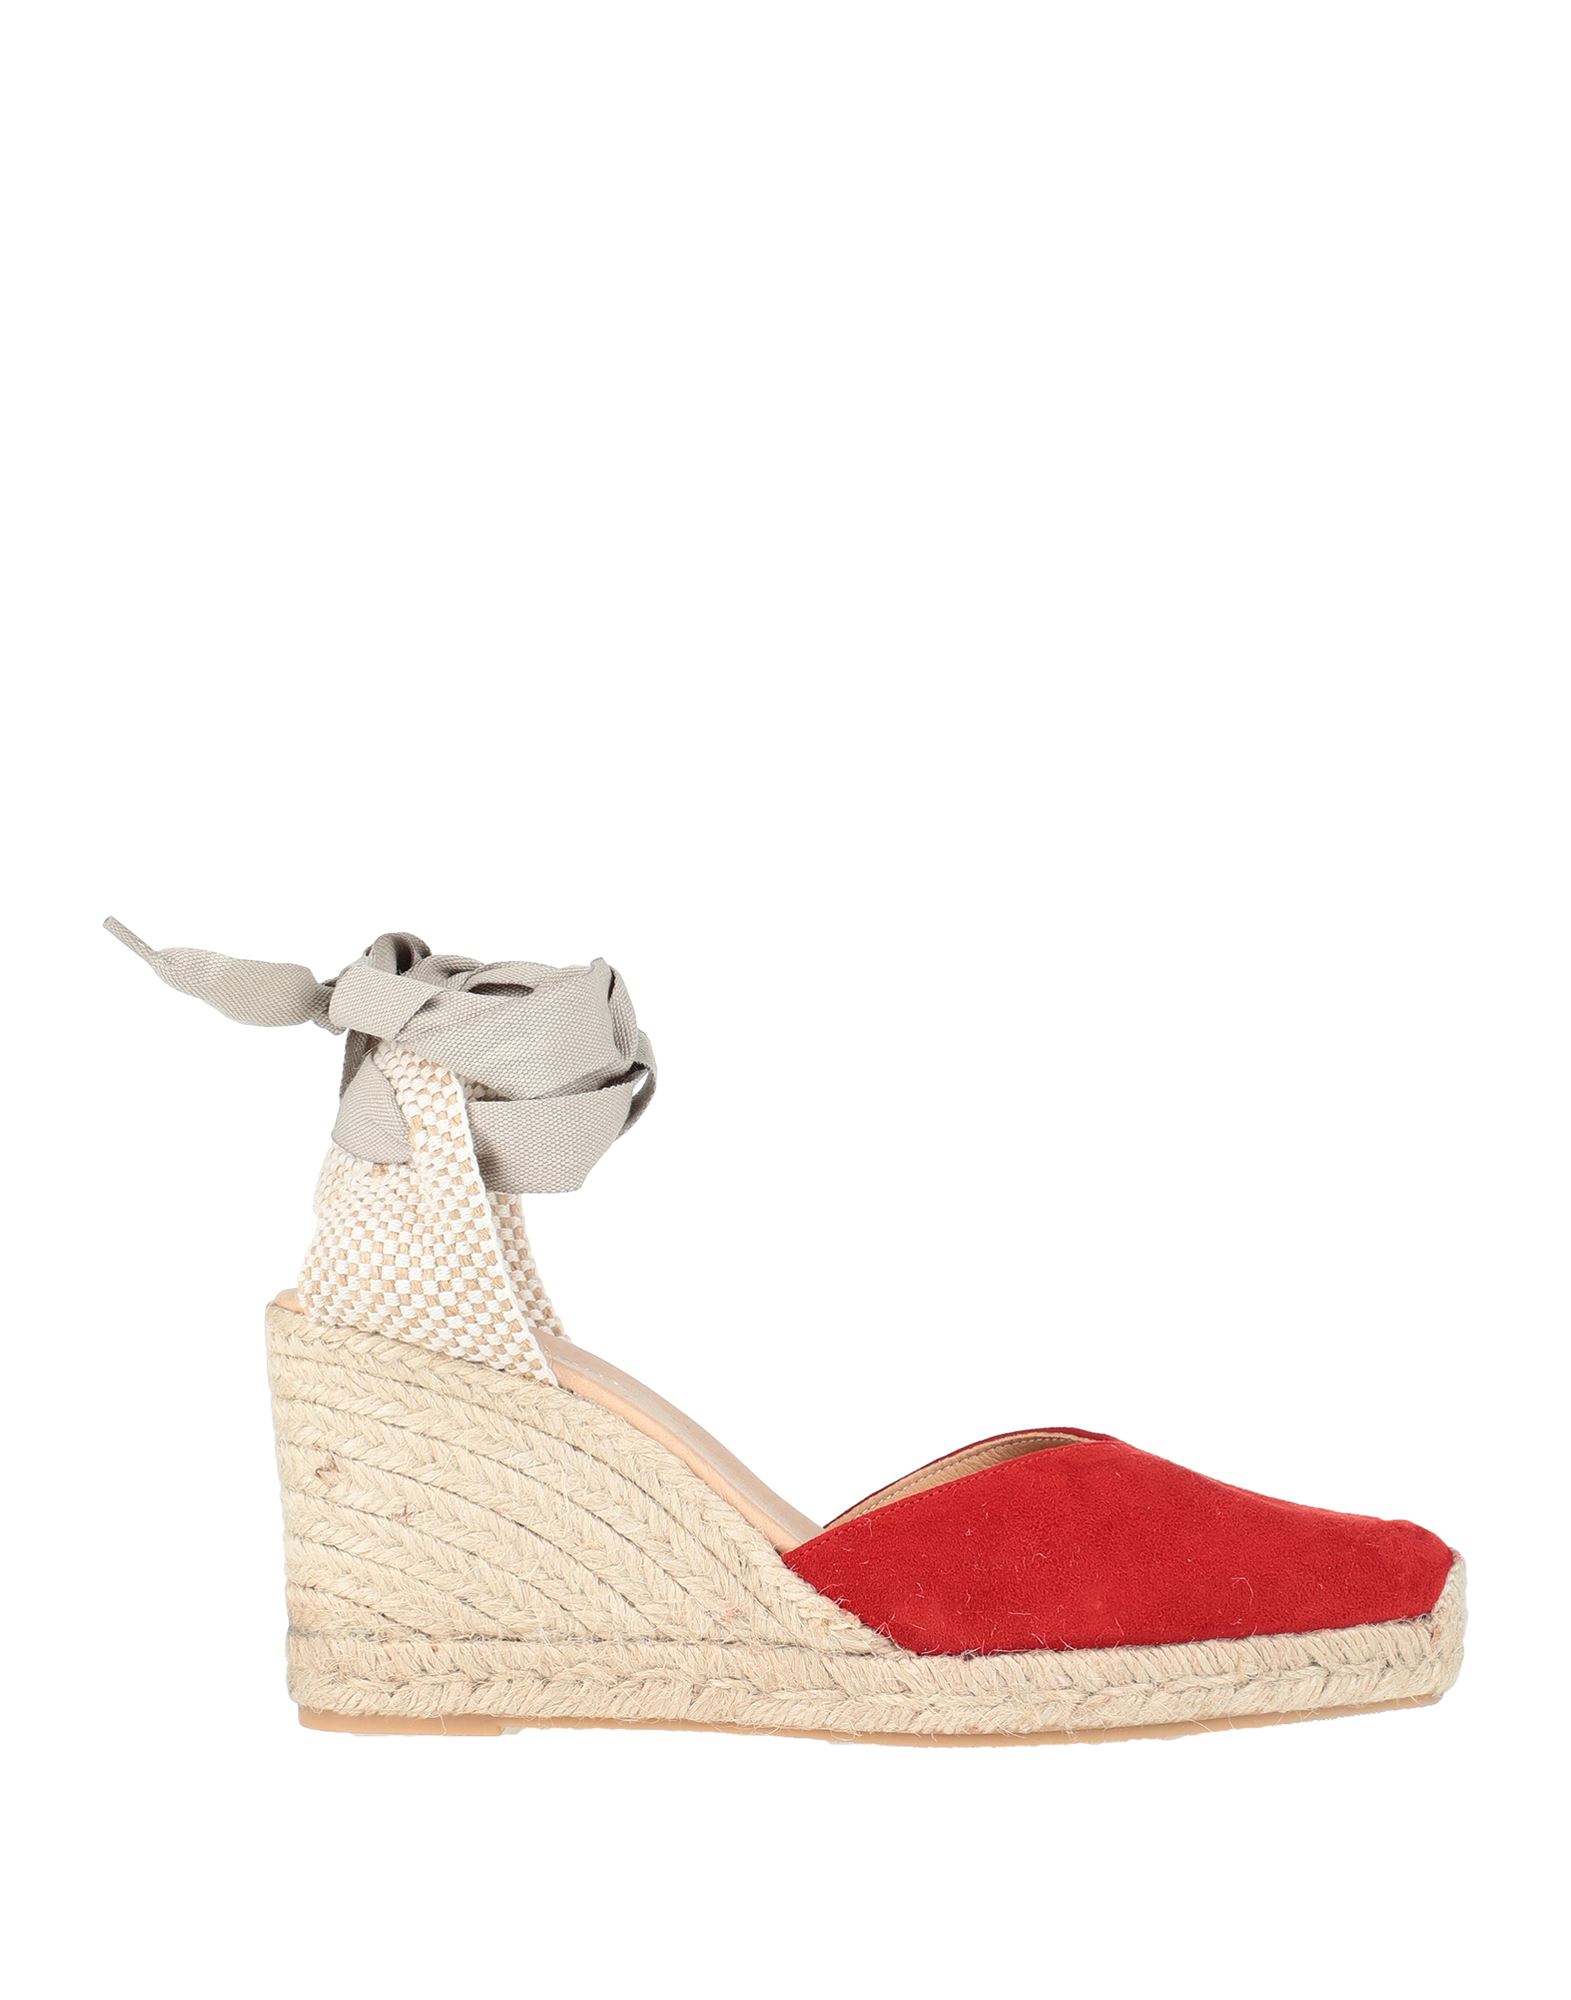 MY CHALOM Espadrilles On Sale, Up To 70% Off | ModeSens